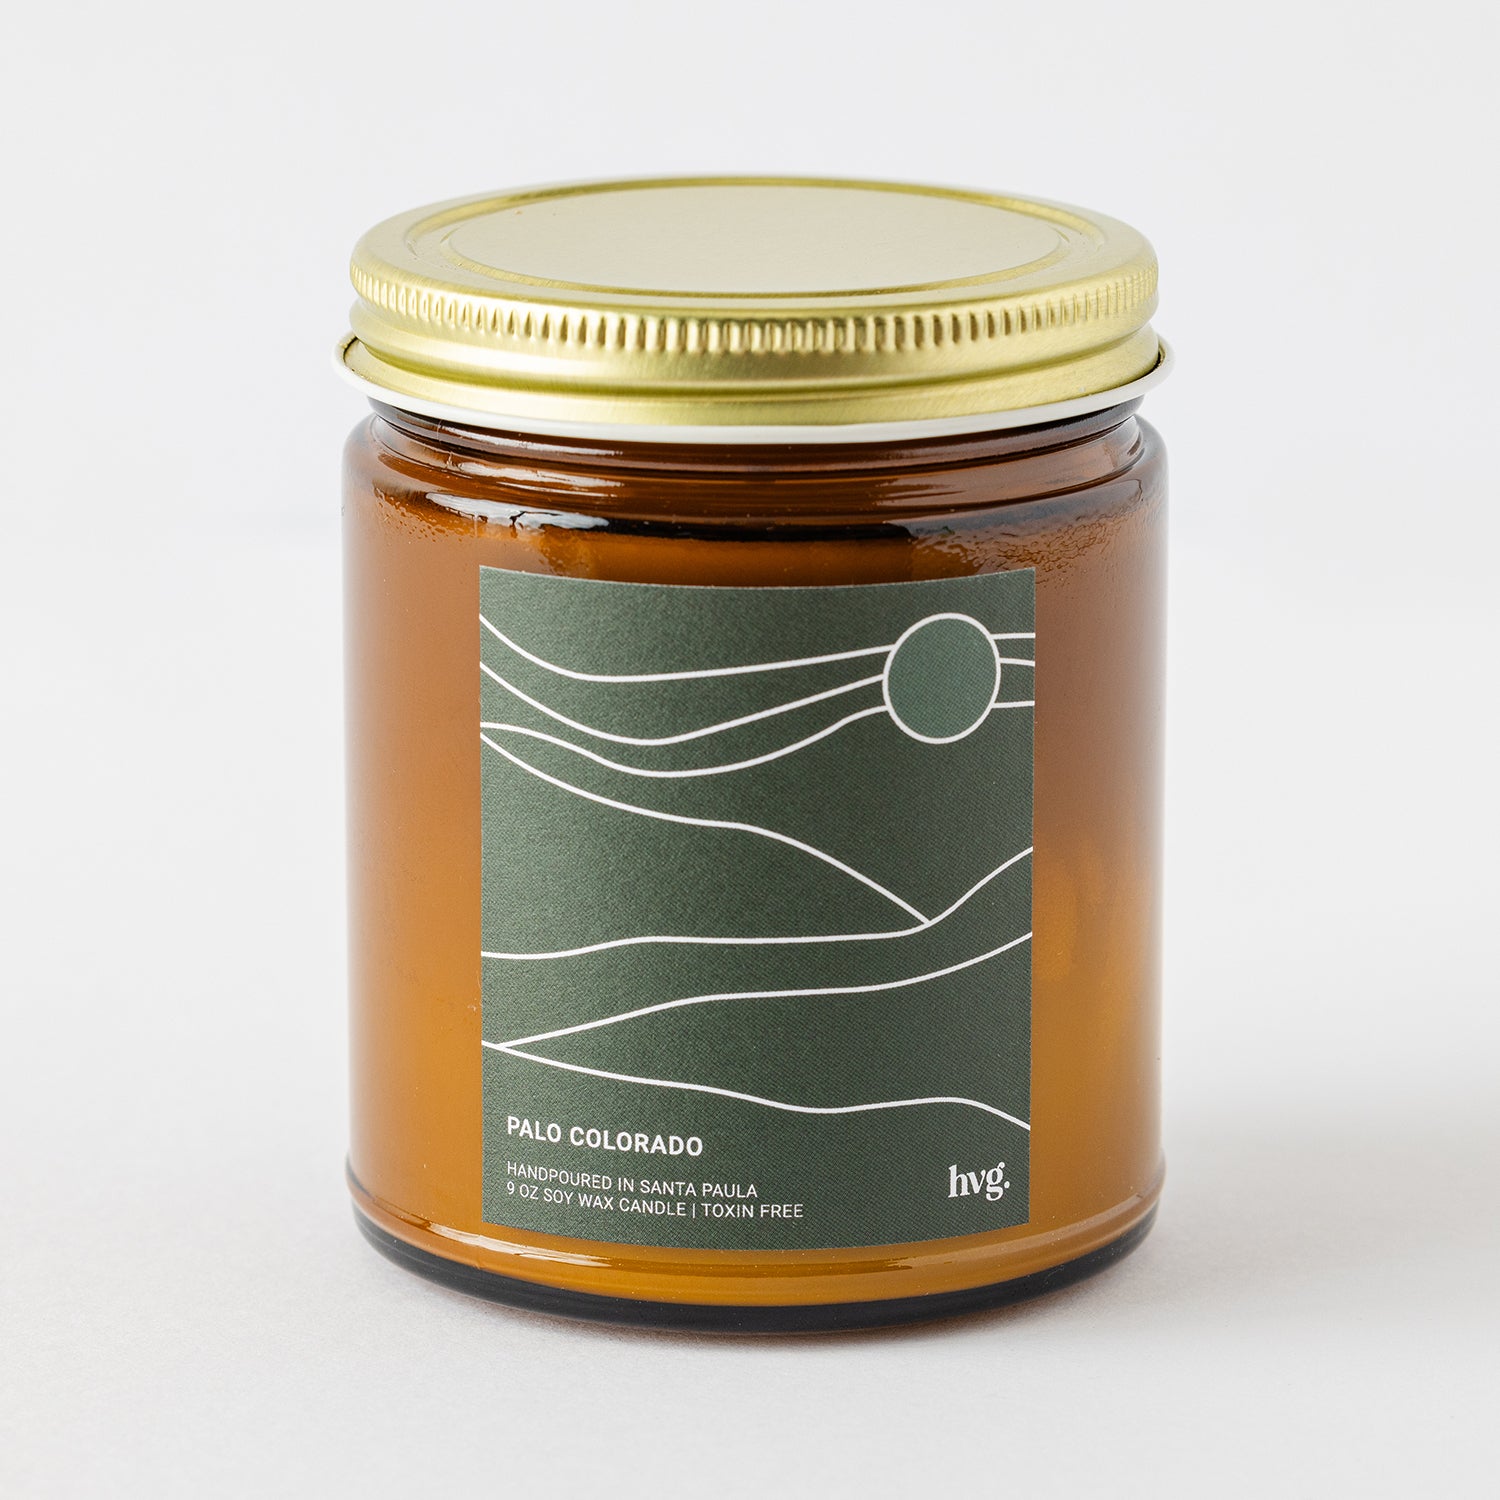 Palo Colorado Candle by Heritage Valley Goods